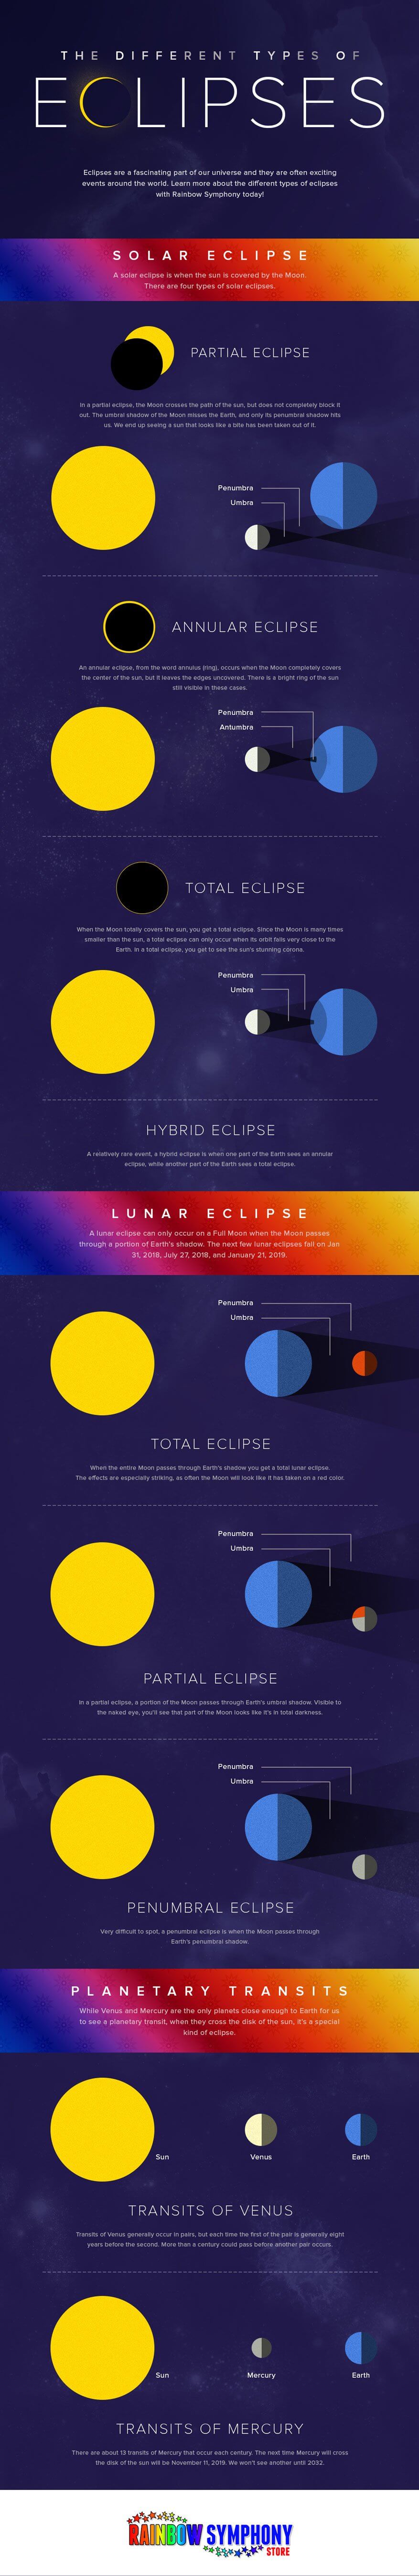 The Different Types of Eclipses